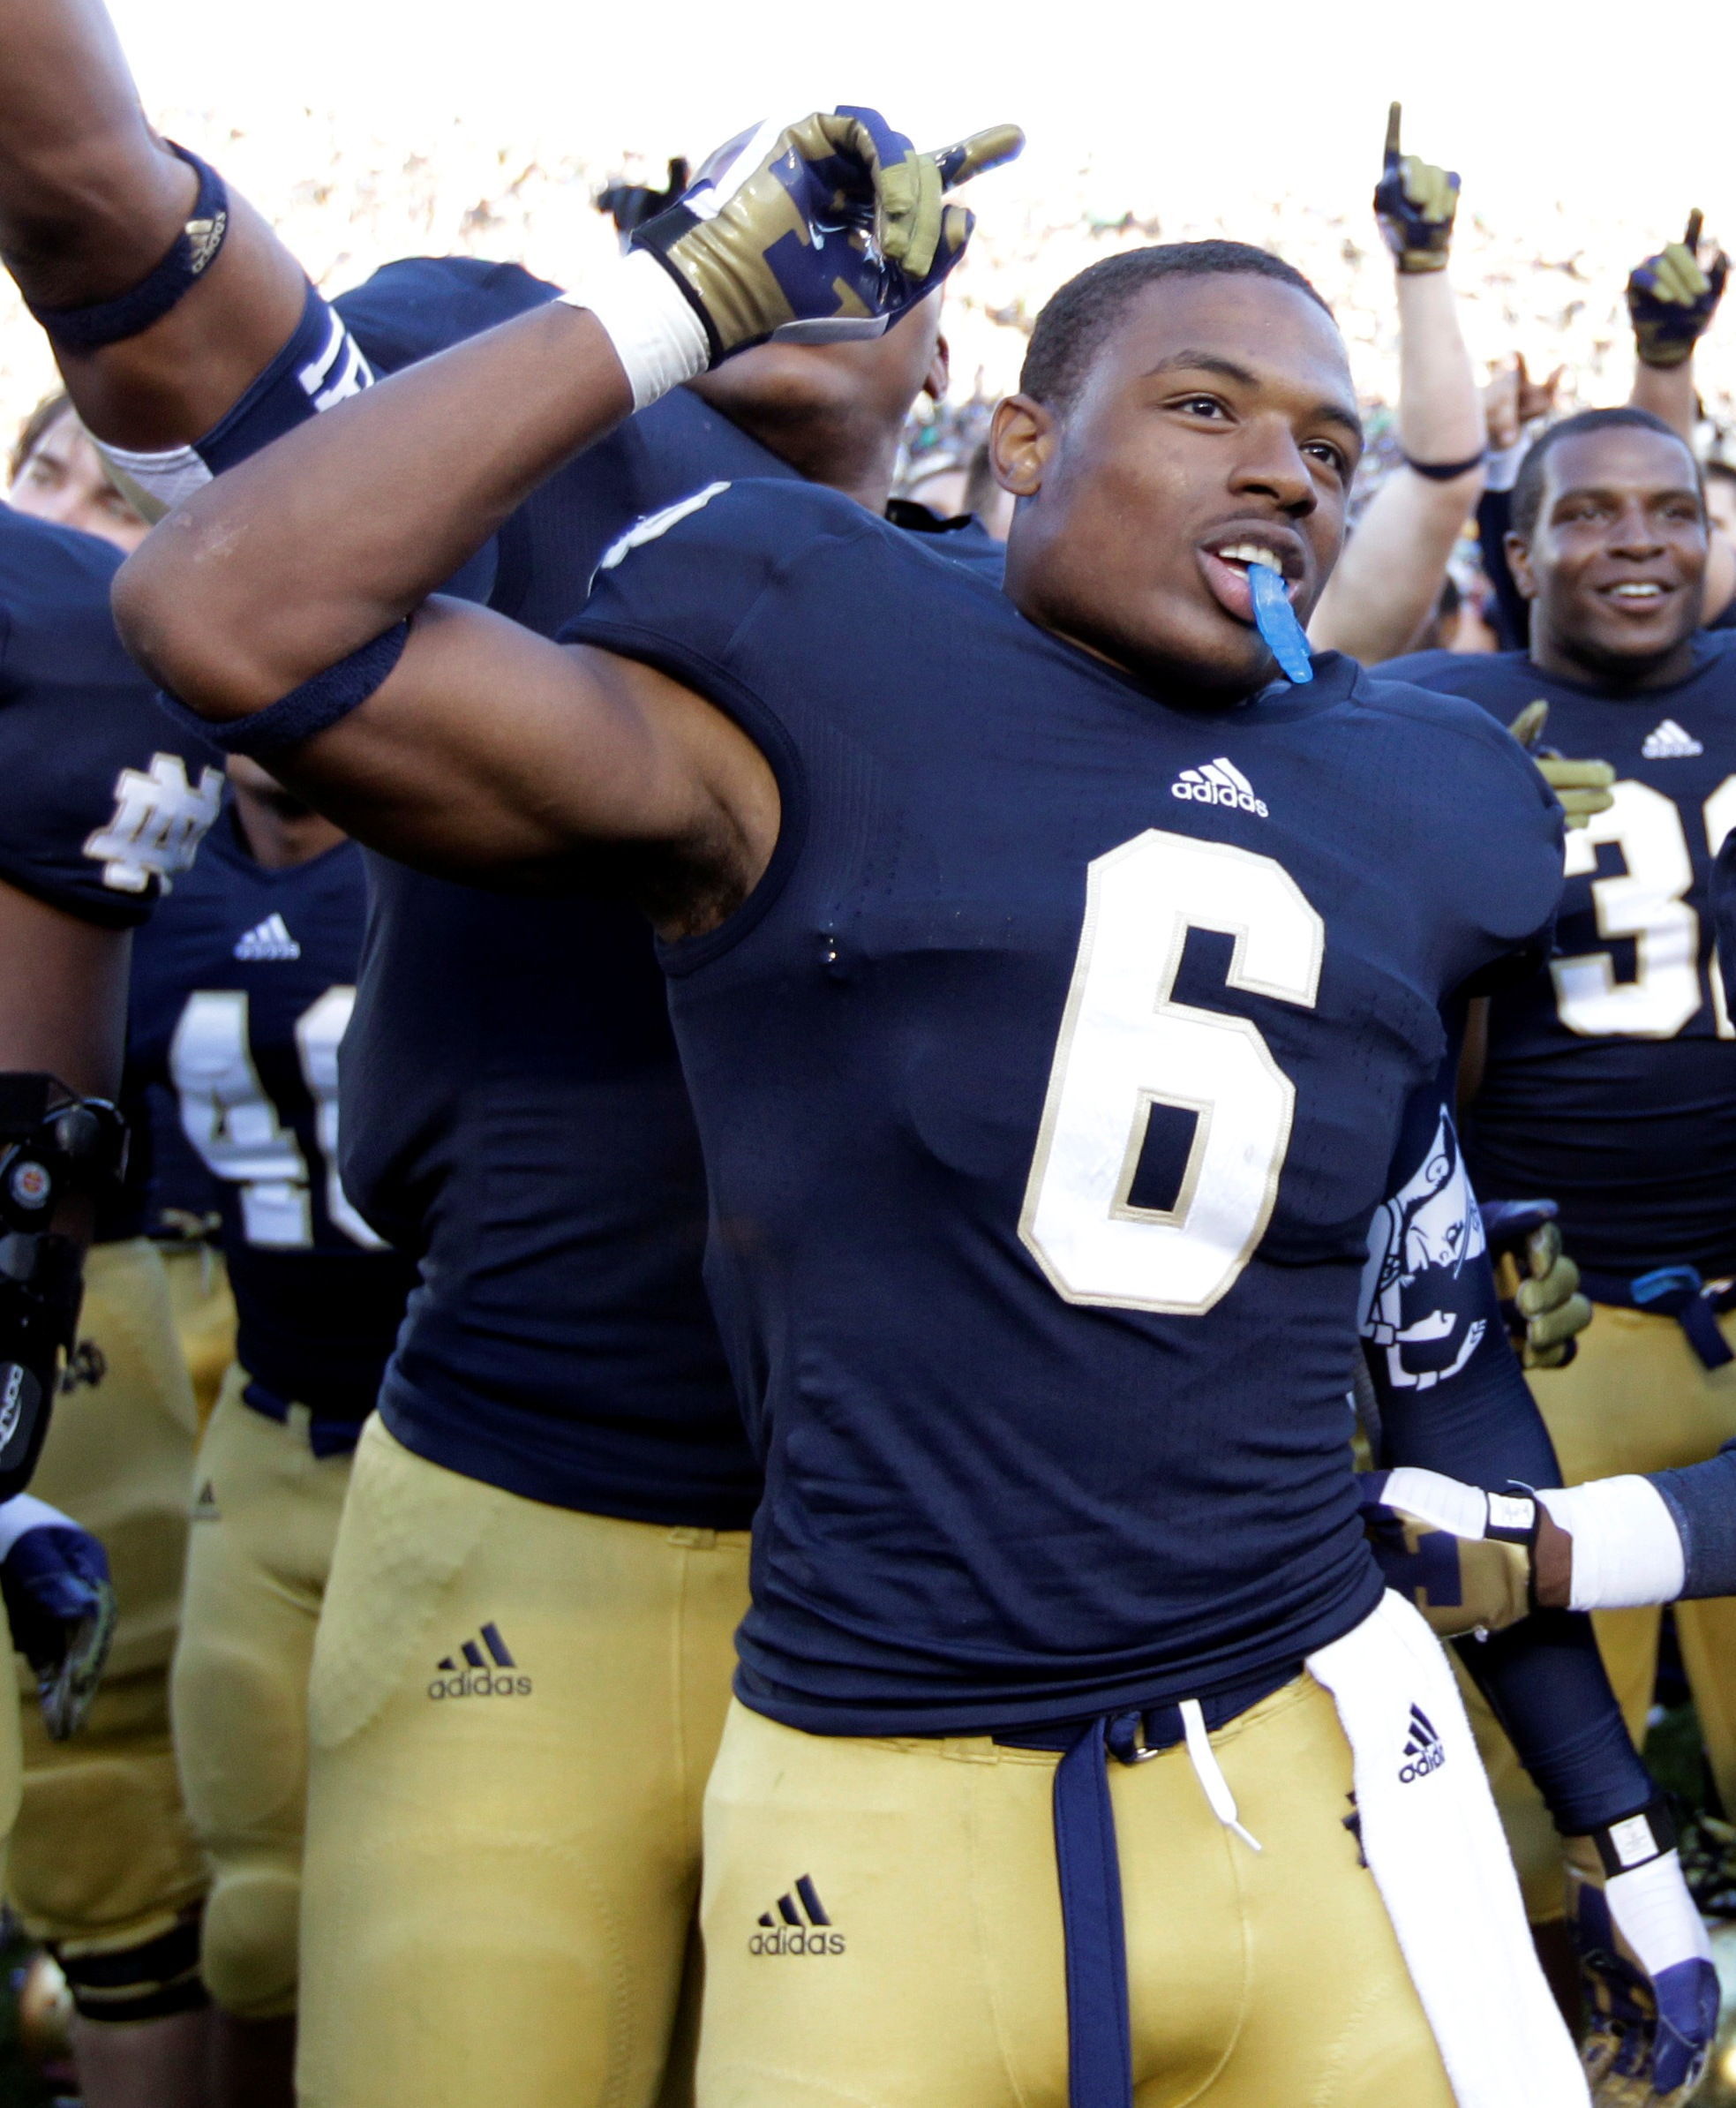 Notre Dame’s KeiVarae Russell was a finalist for The Herald’s 2015 Man of the Year in Sports award.